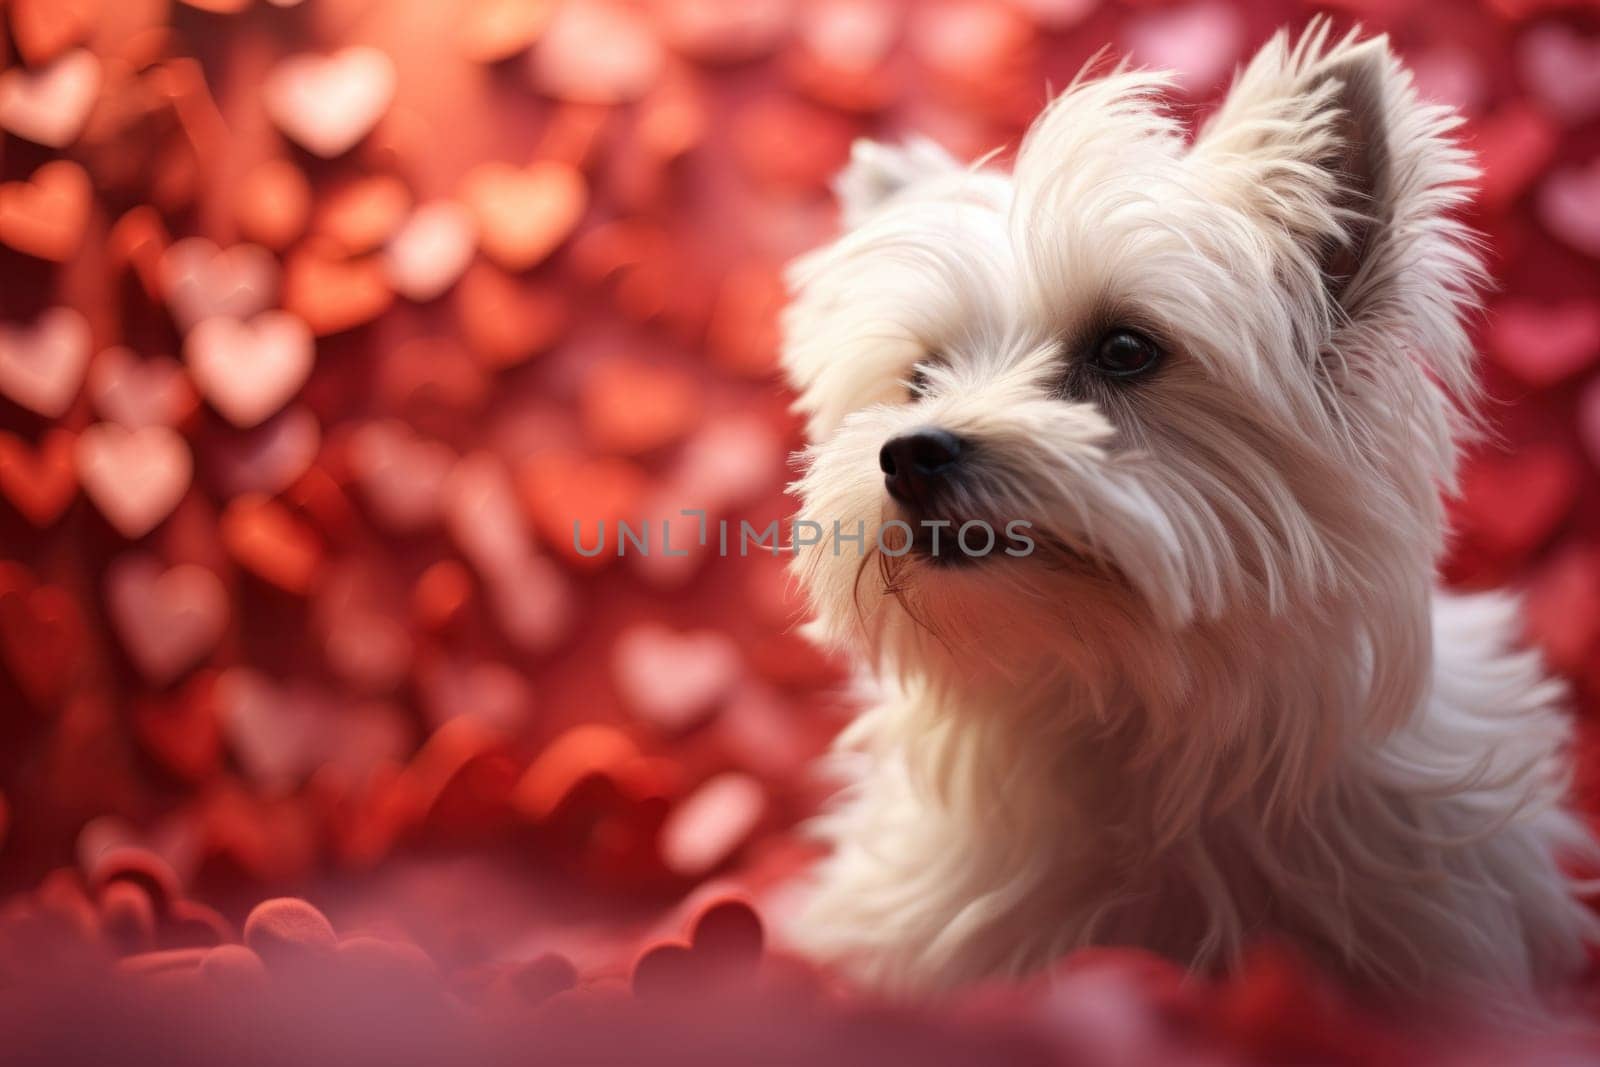 A small white dog sitting in front of a bunch of hearts